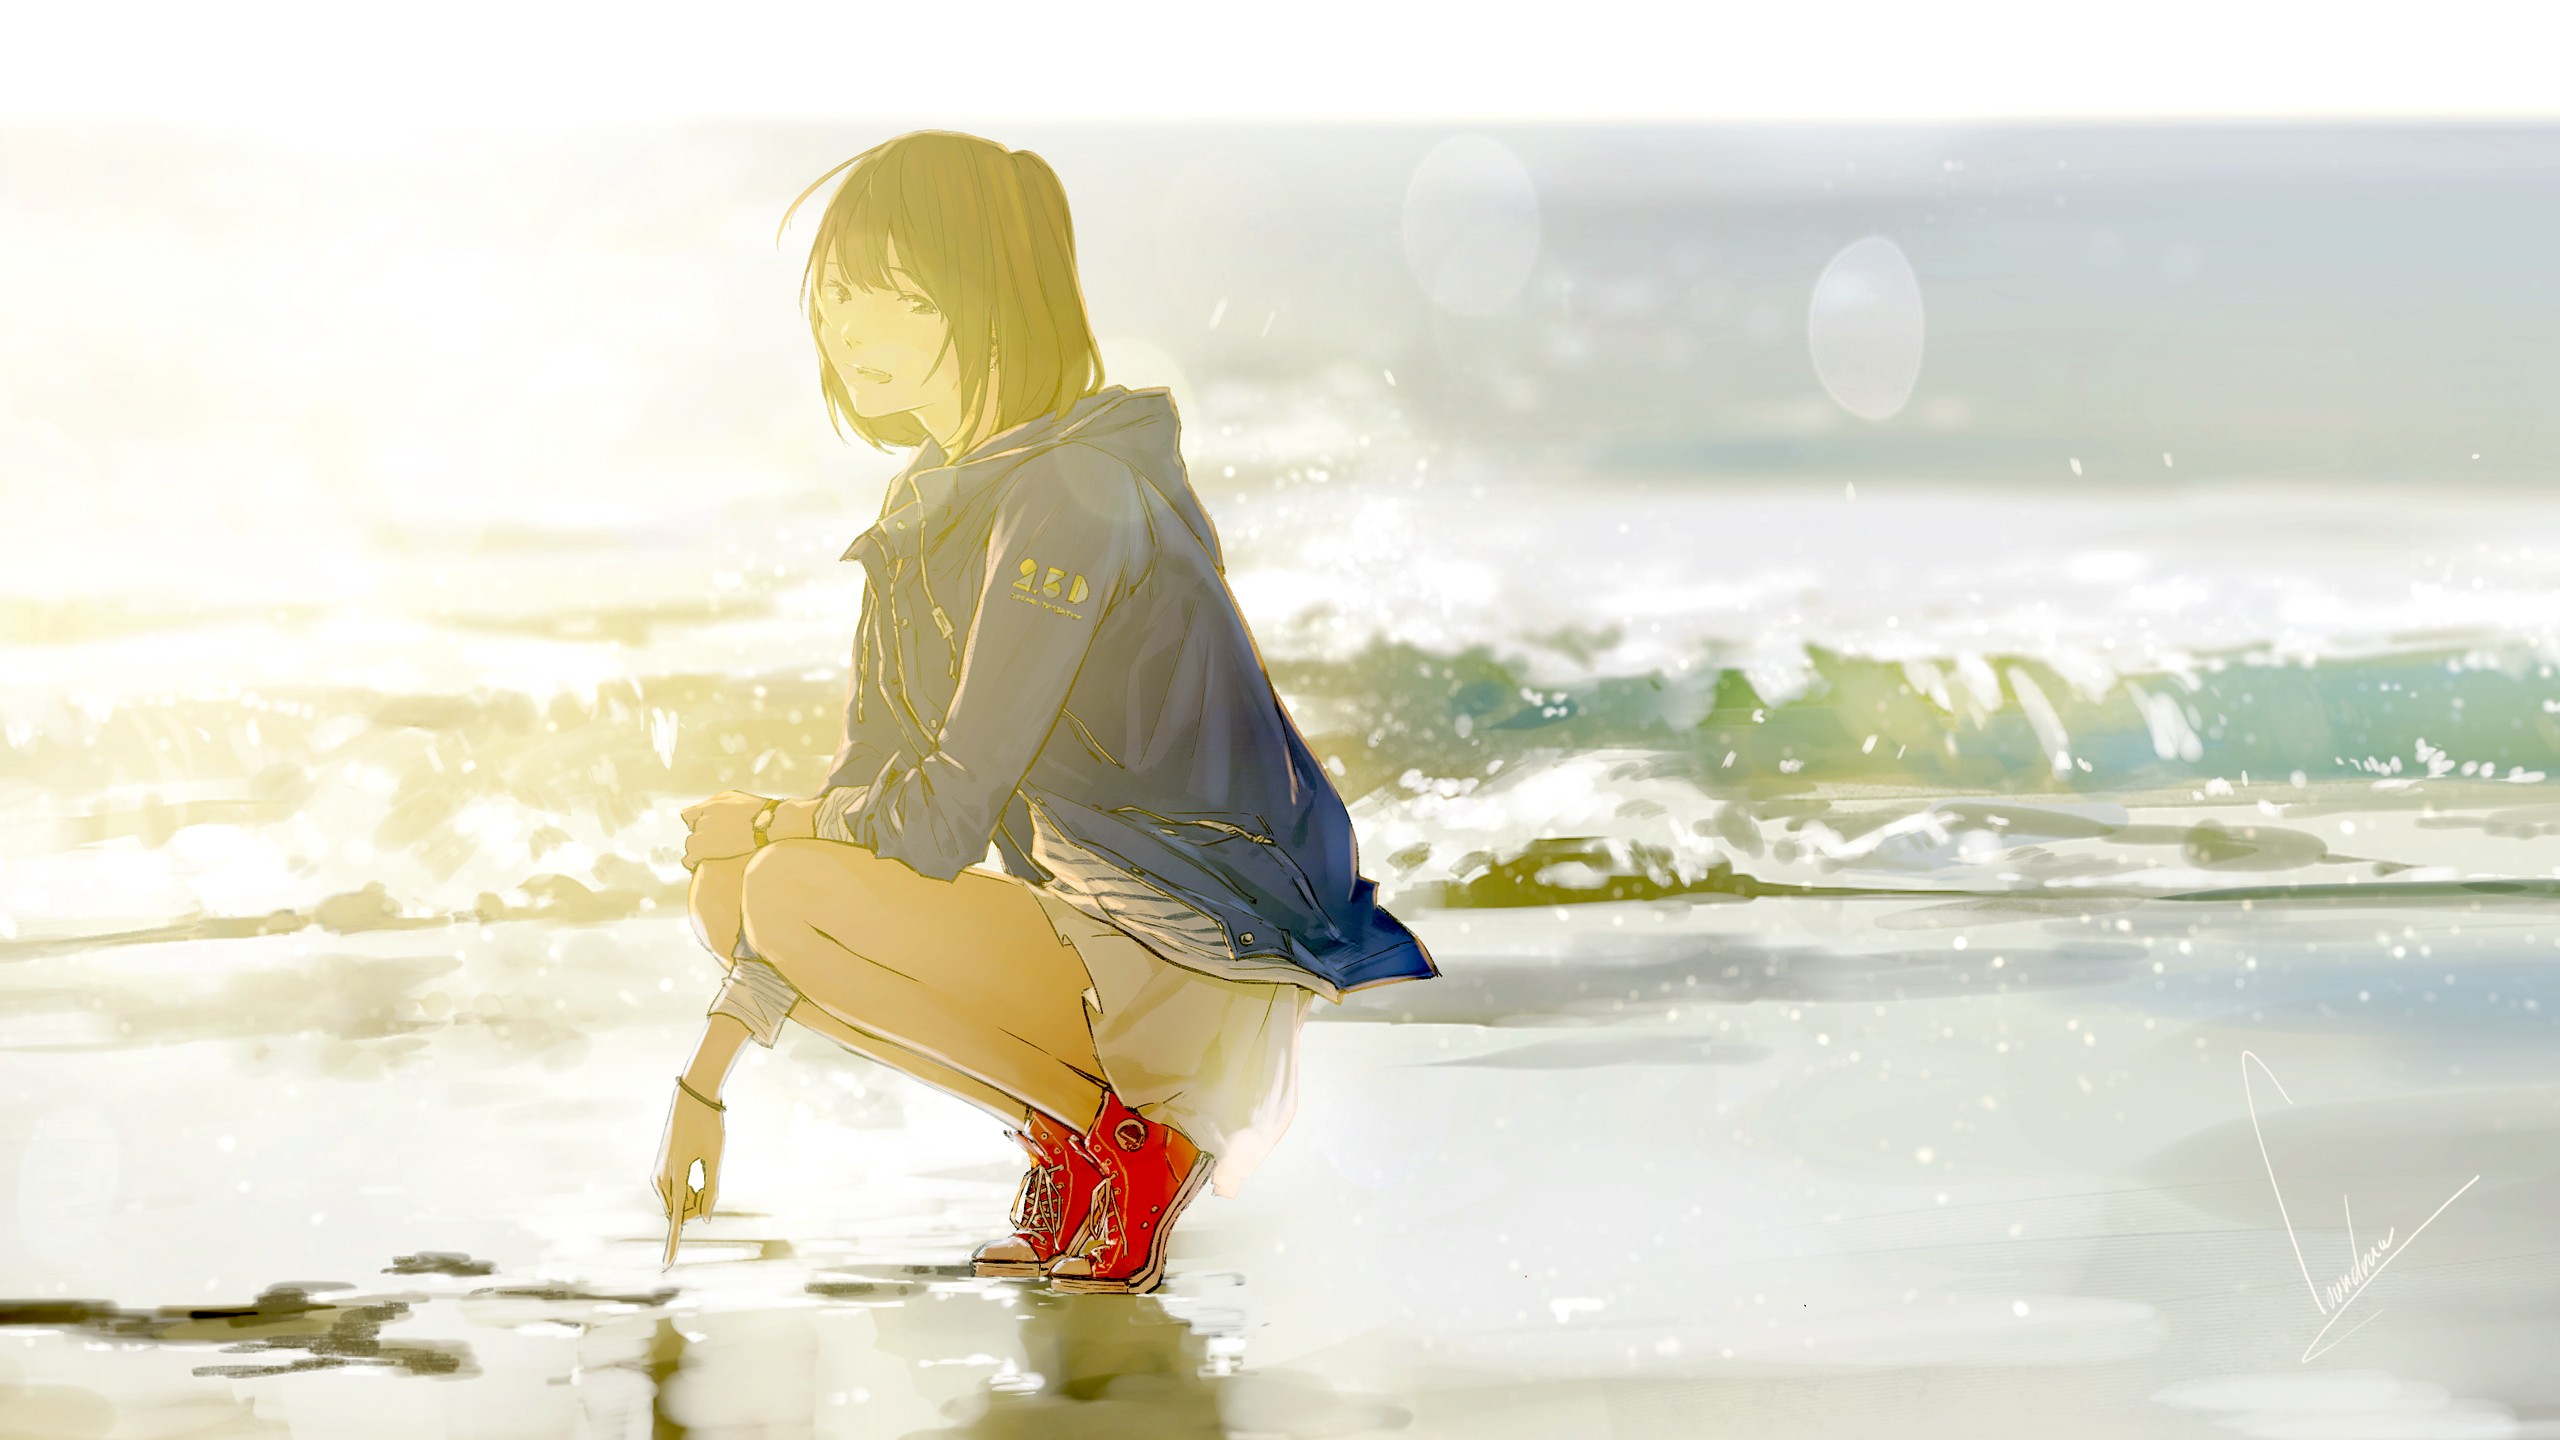 Anime 2560x1440 beach sea sunlight anime looking at viewer outdoors women outdoors squatting anime girls women on beach red shoes water waves jacket overexposed signature bent legs loundraw hand(s) between legs sand open jacket blue jacket short hair shoelaces tiptoe wristwatch open mouth brunette